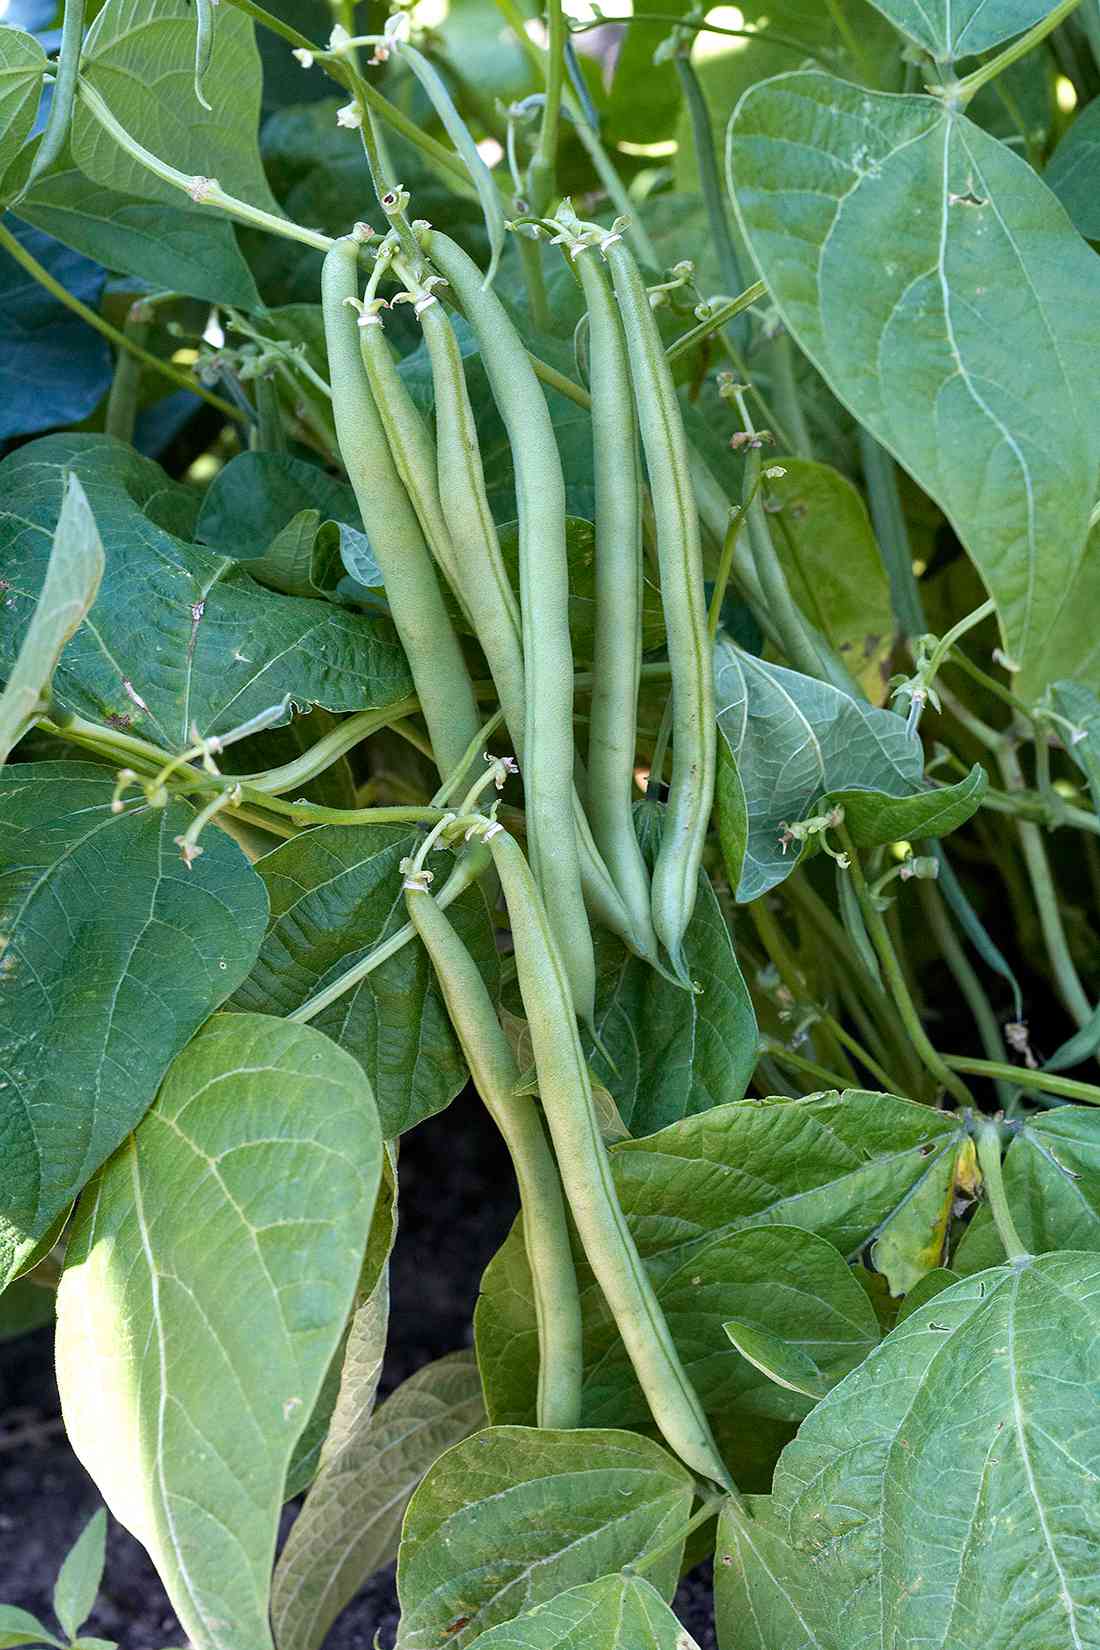 derby green beans hanging from vine